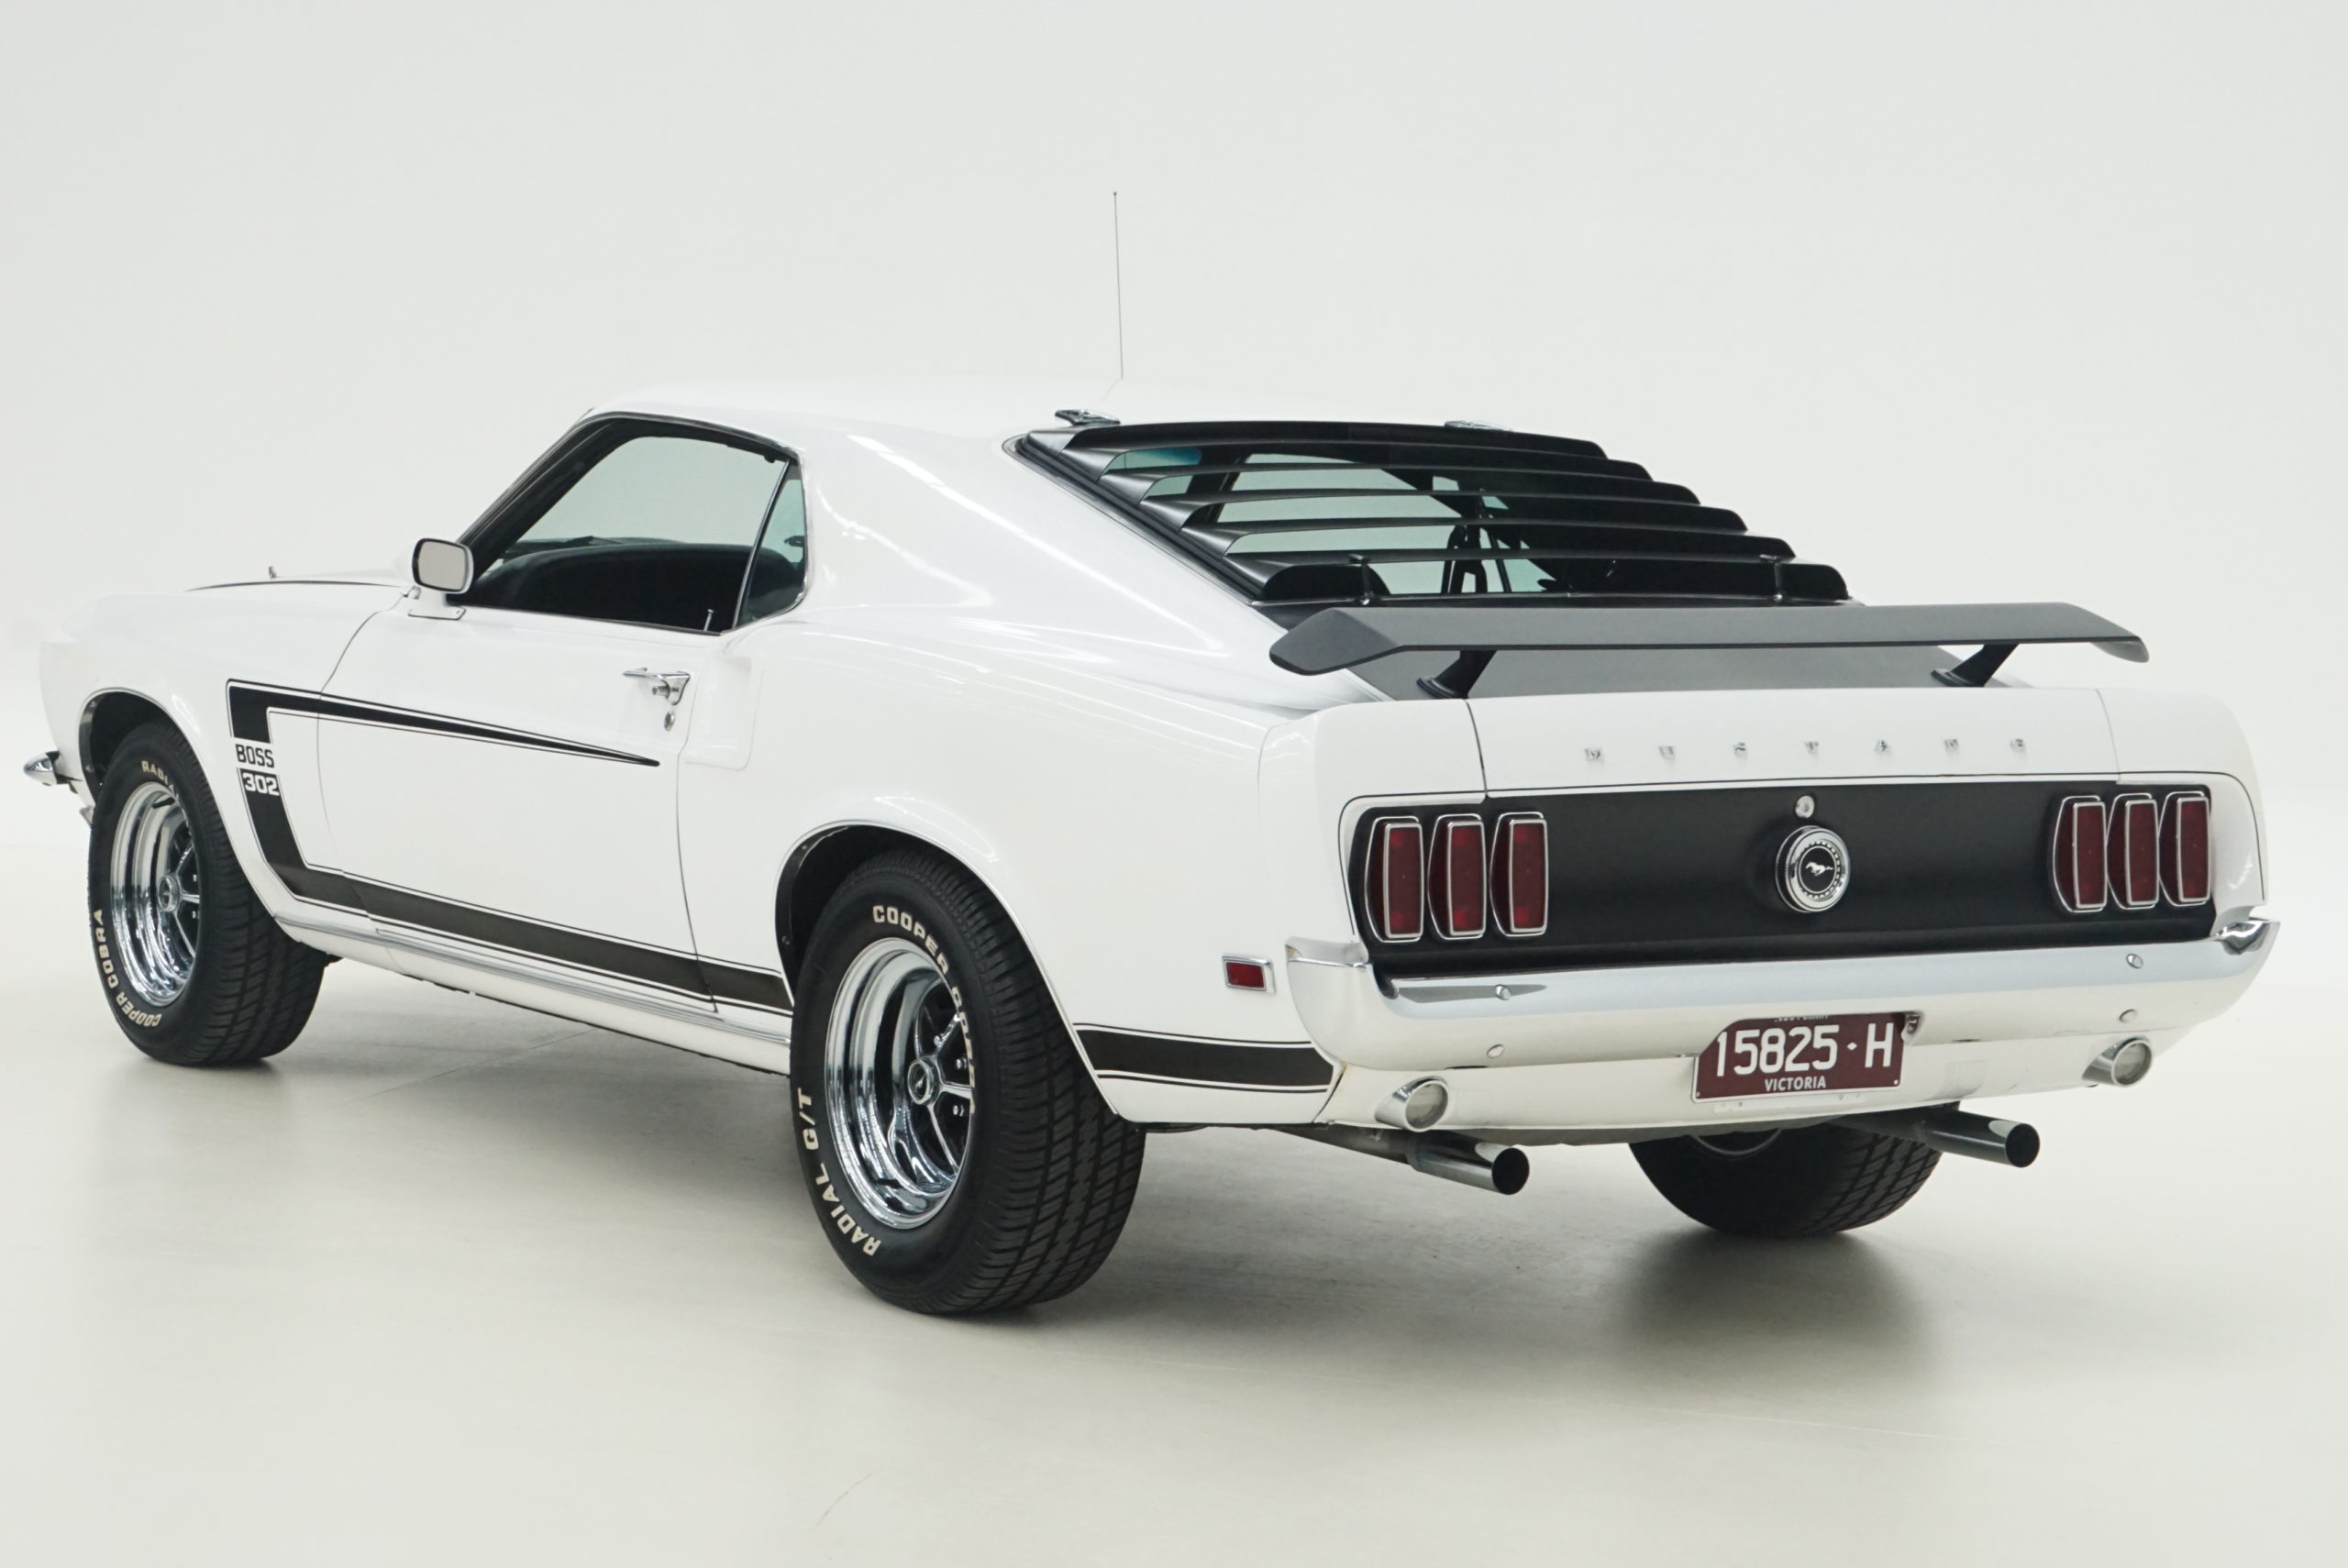 1969 Ford Mustang Boss 302 Tribute Fastback trois quarts arrière gauche - Shannons Auctions avril 2021.